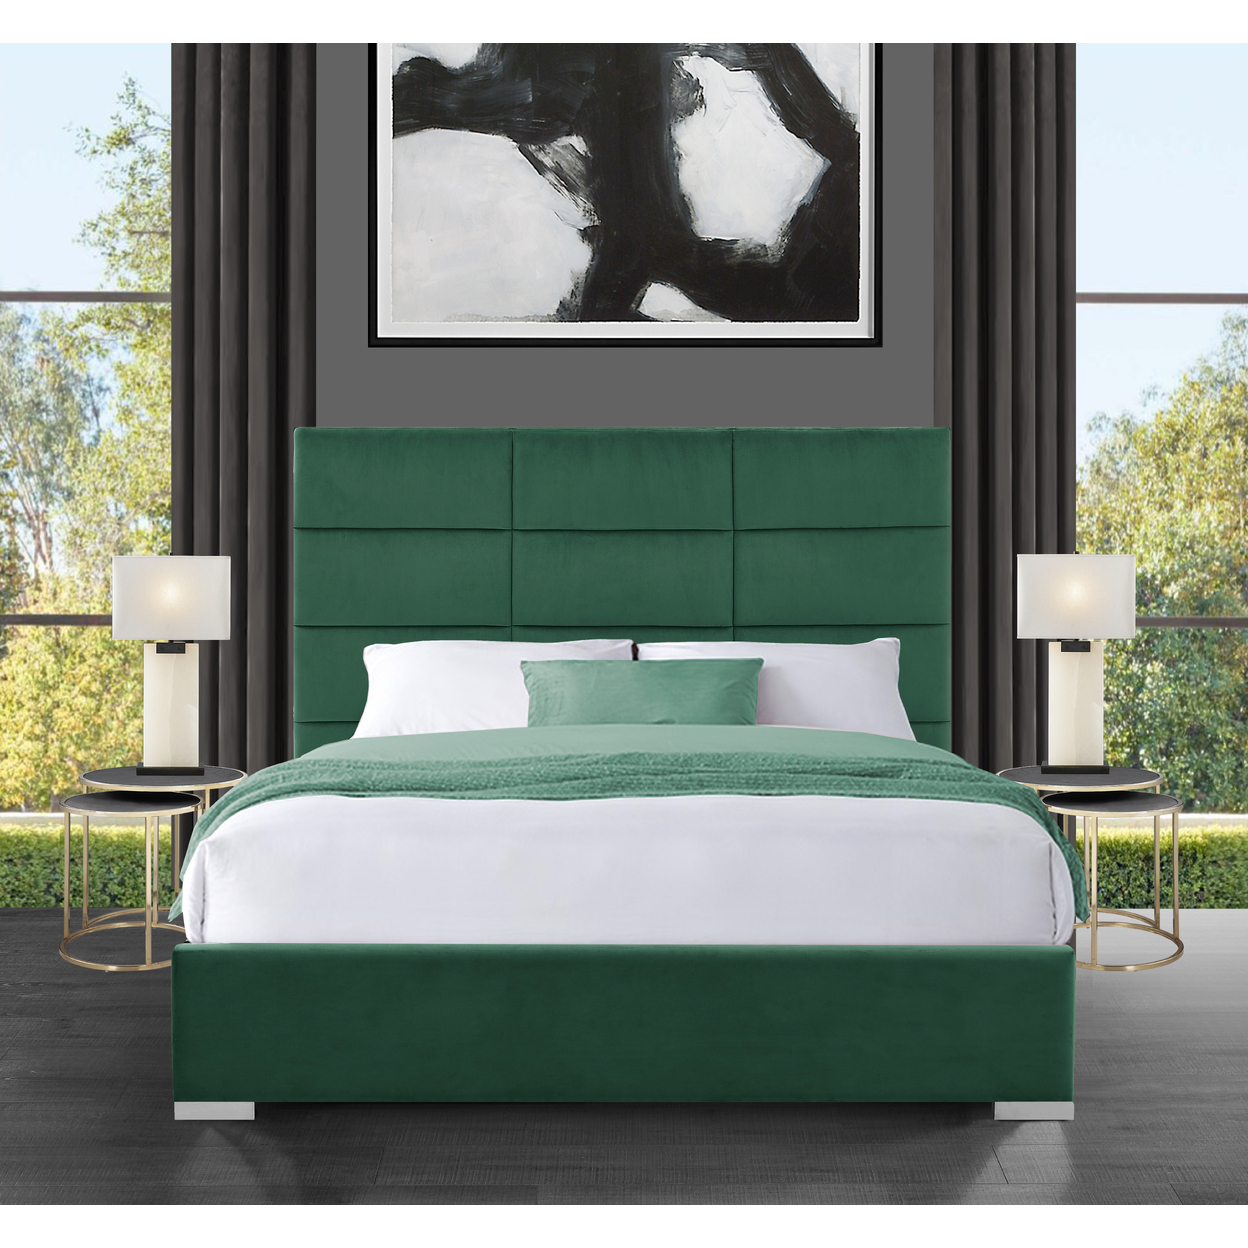 Iconic Home Durazzo Storage Platform Bed Frame With Headboard Velvet Upholstered Box Quilted, Modern Contemporary - Dark Green, King